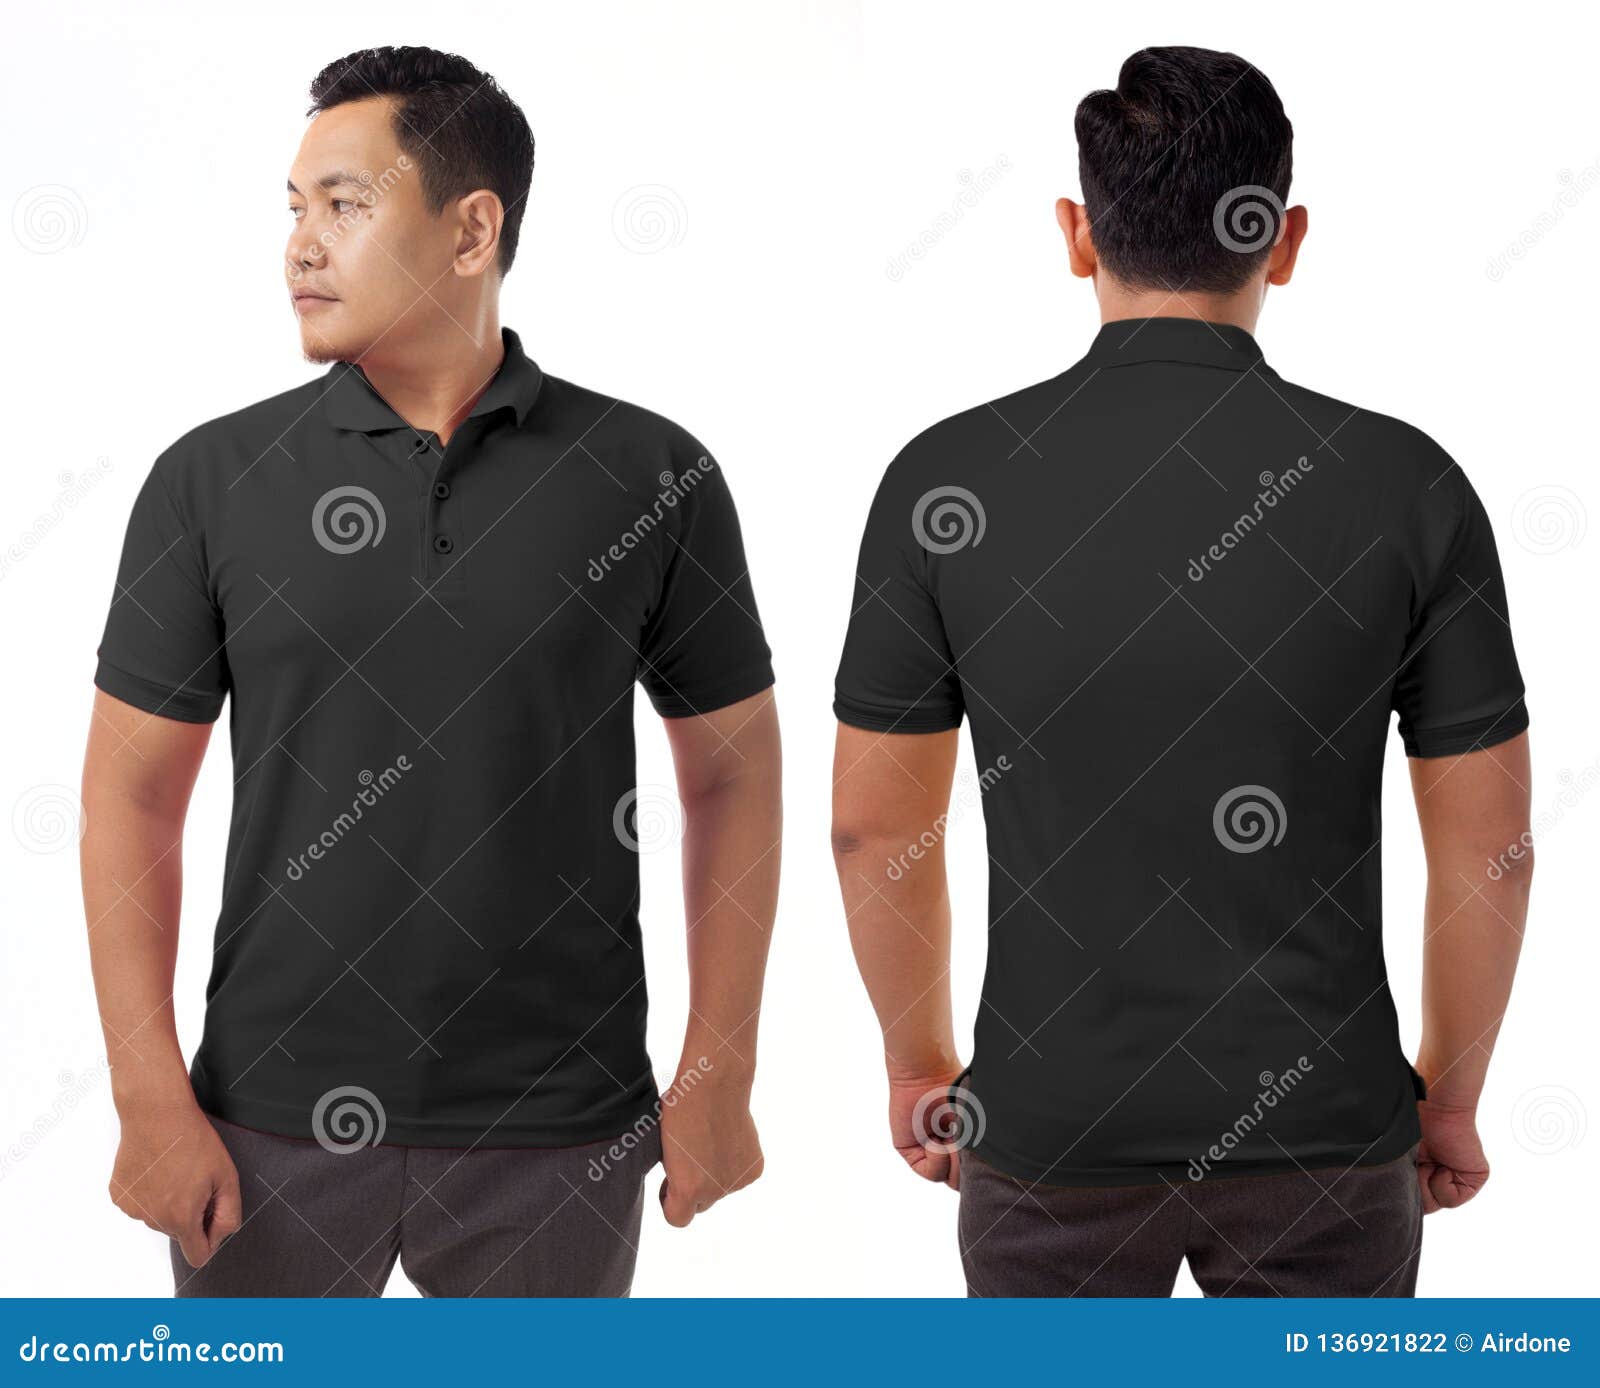 Black Collared Shirt Design Template Stock Photo - Image of copy, blank ...